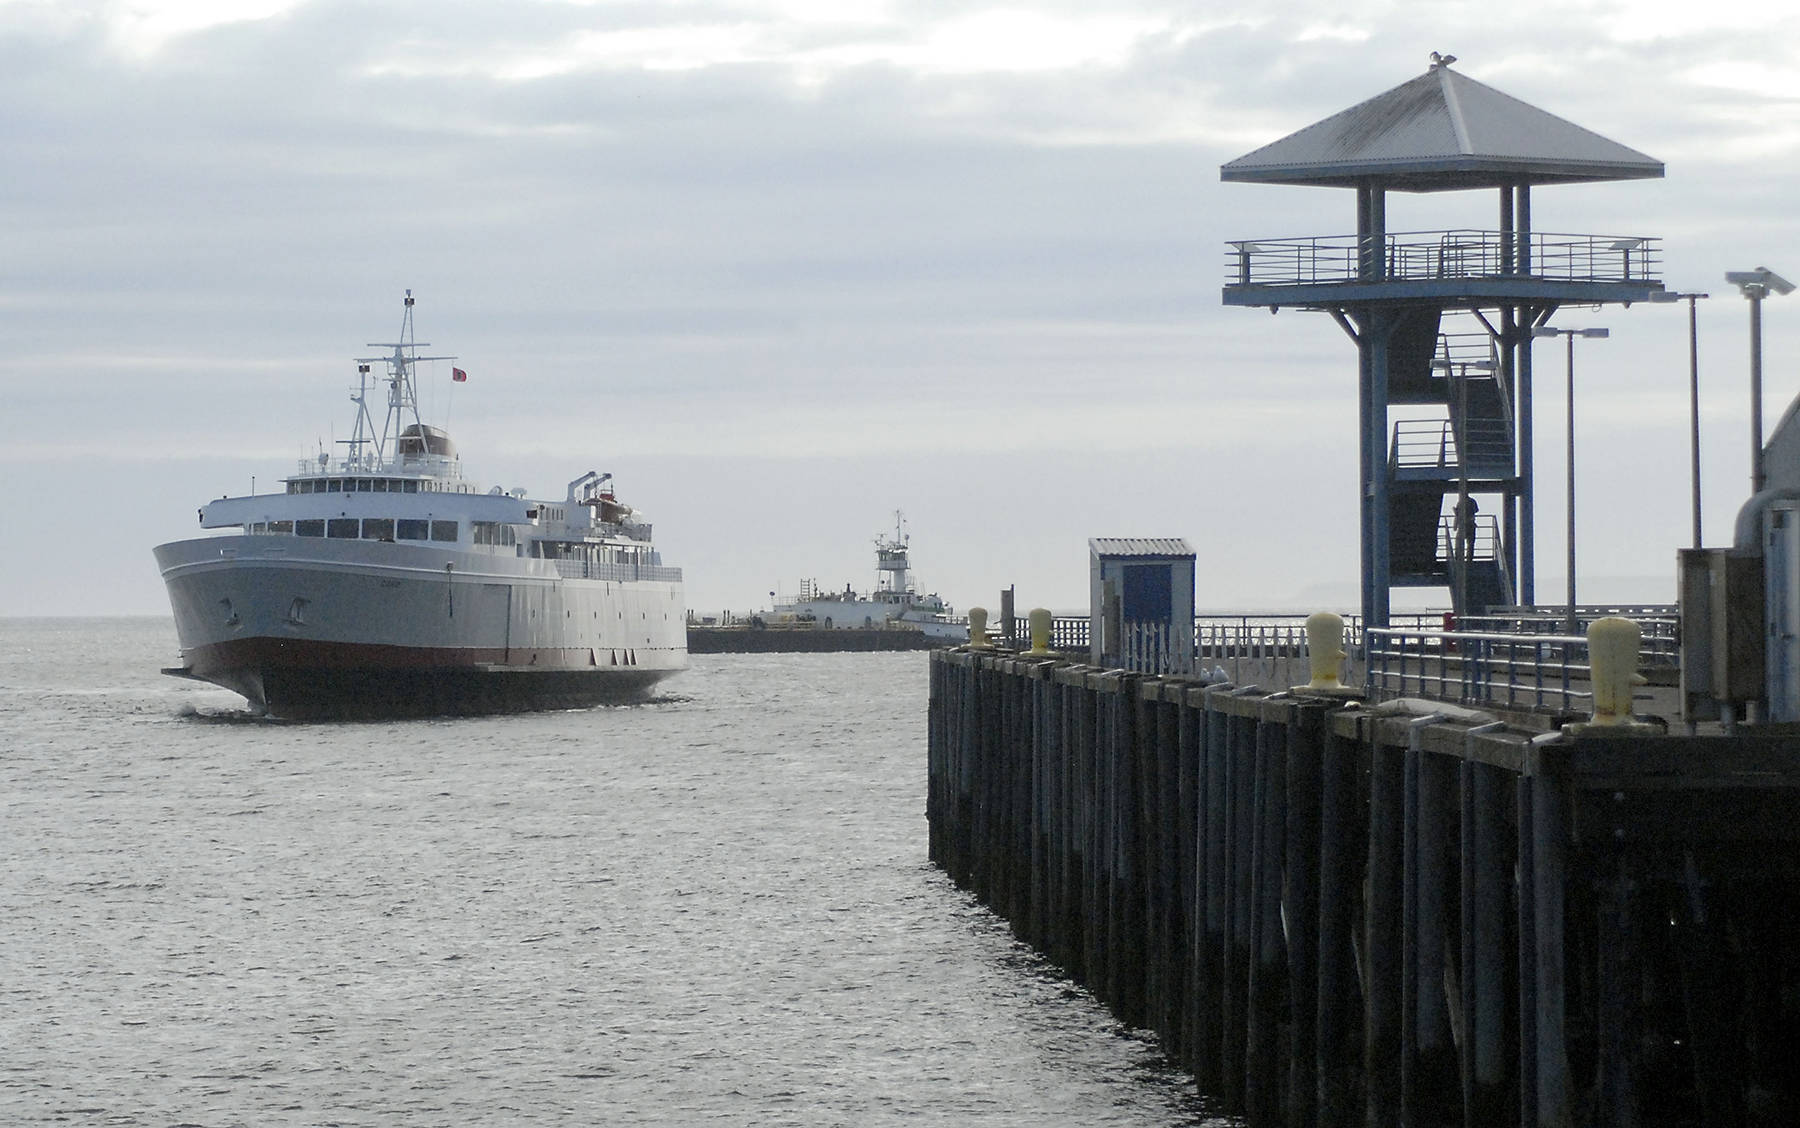 Will Coho ferry service be stalled for the rest of the year?